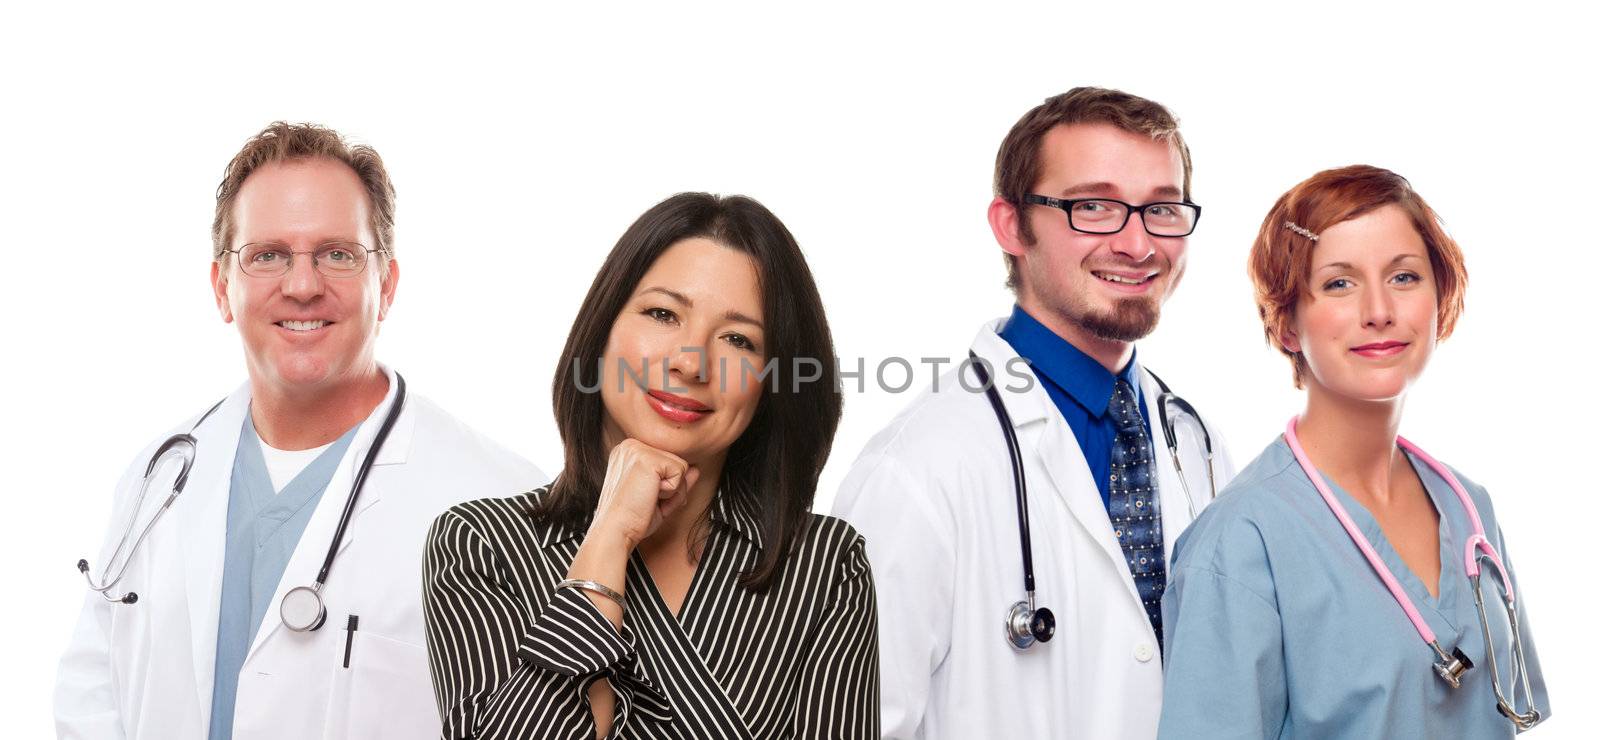 Attractive Hispanic Woman with Male and Female Doctors or Nurses Isolated on a White Background.